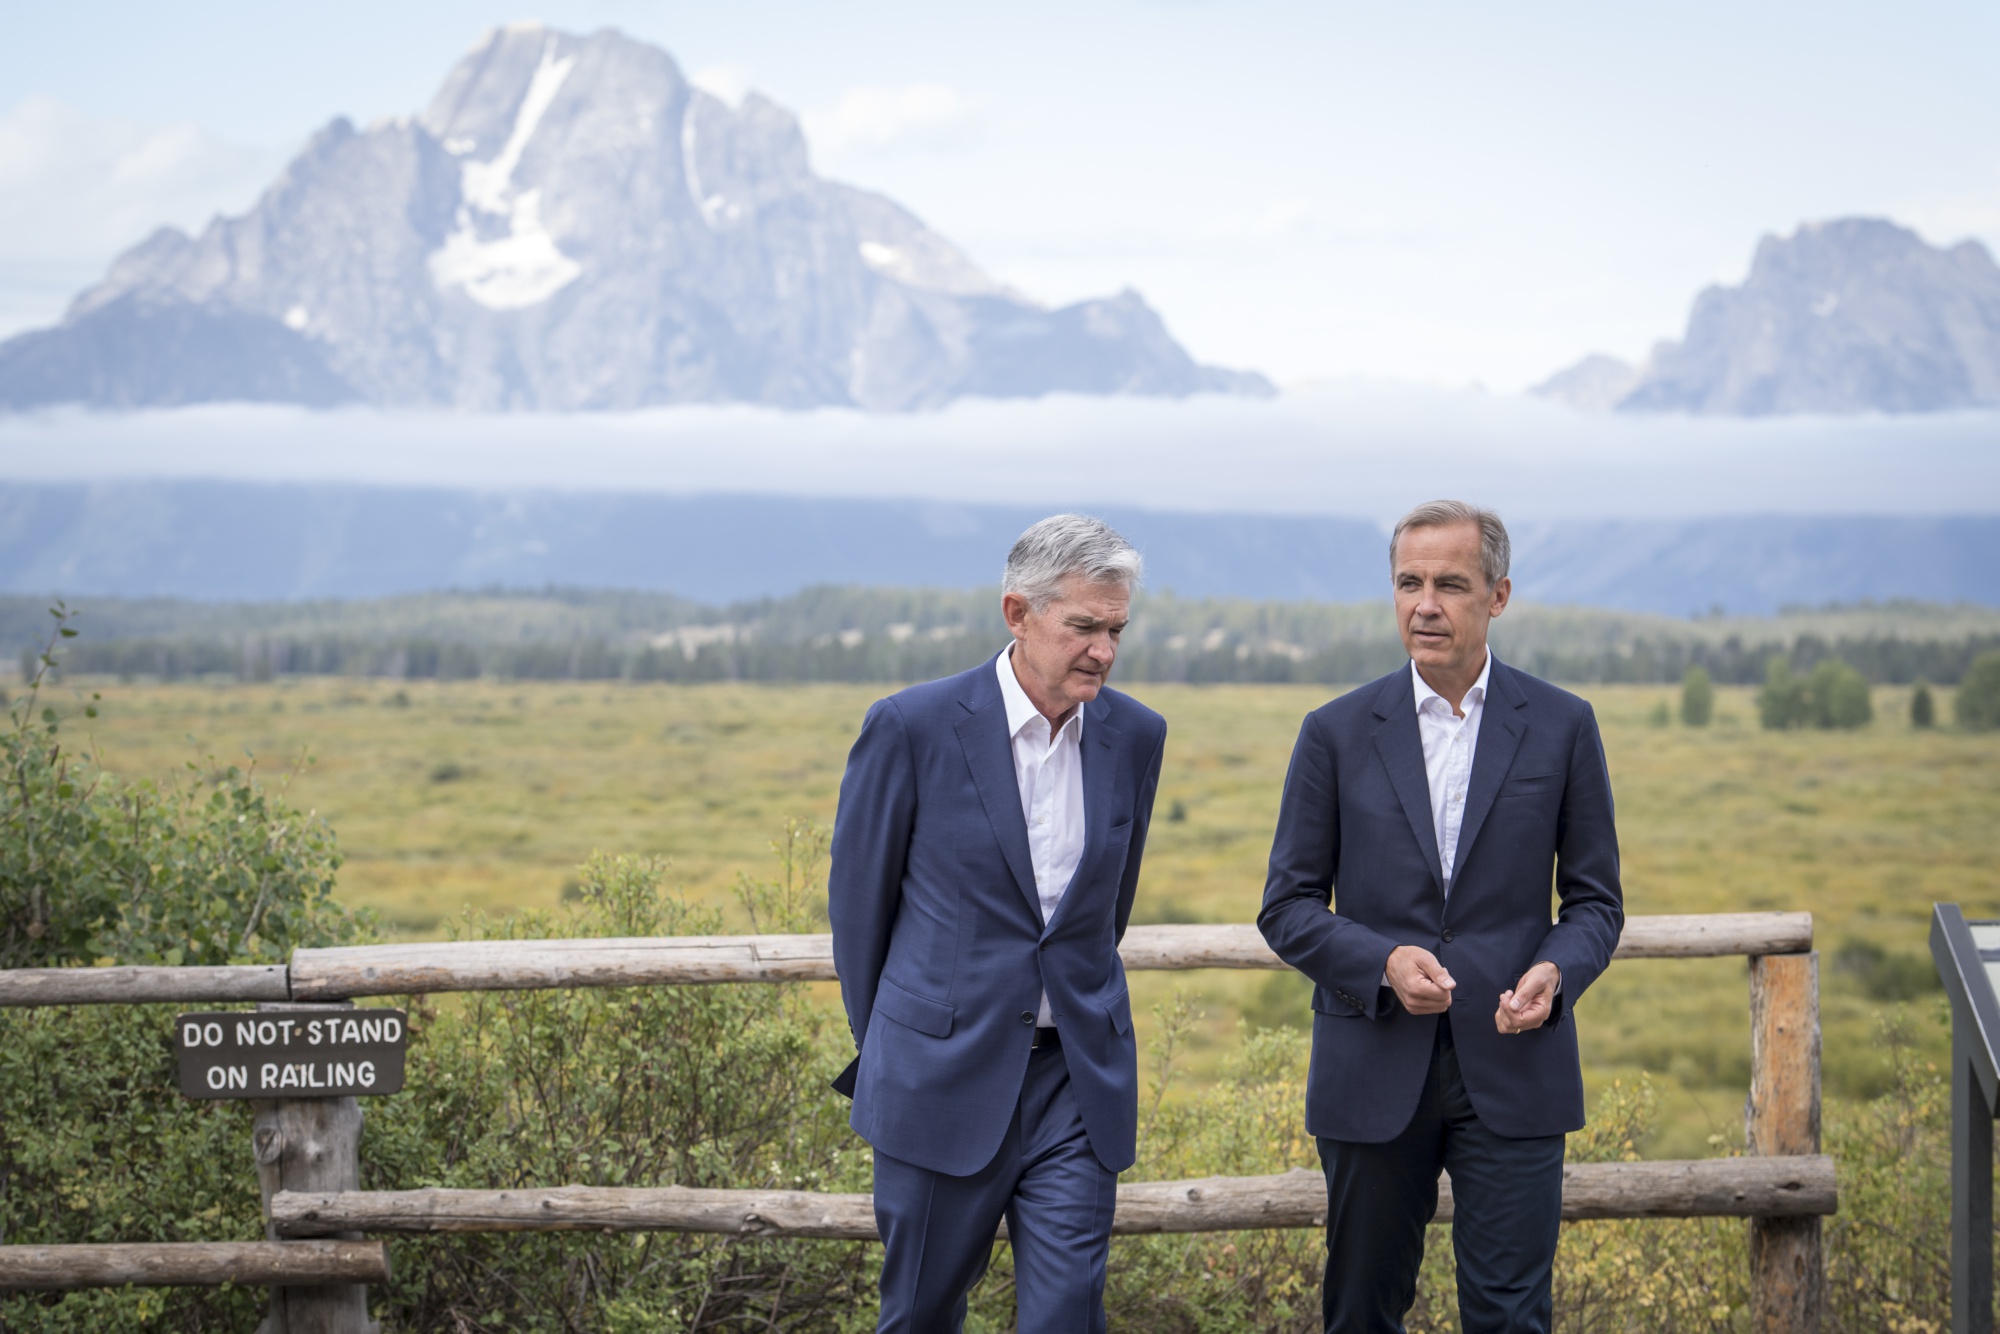 Jerome Powell and Mark Carney, governor of the Bank of England (BOE), walk the grounds during the Jackson Hole economic symposium.